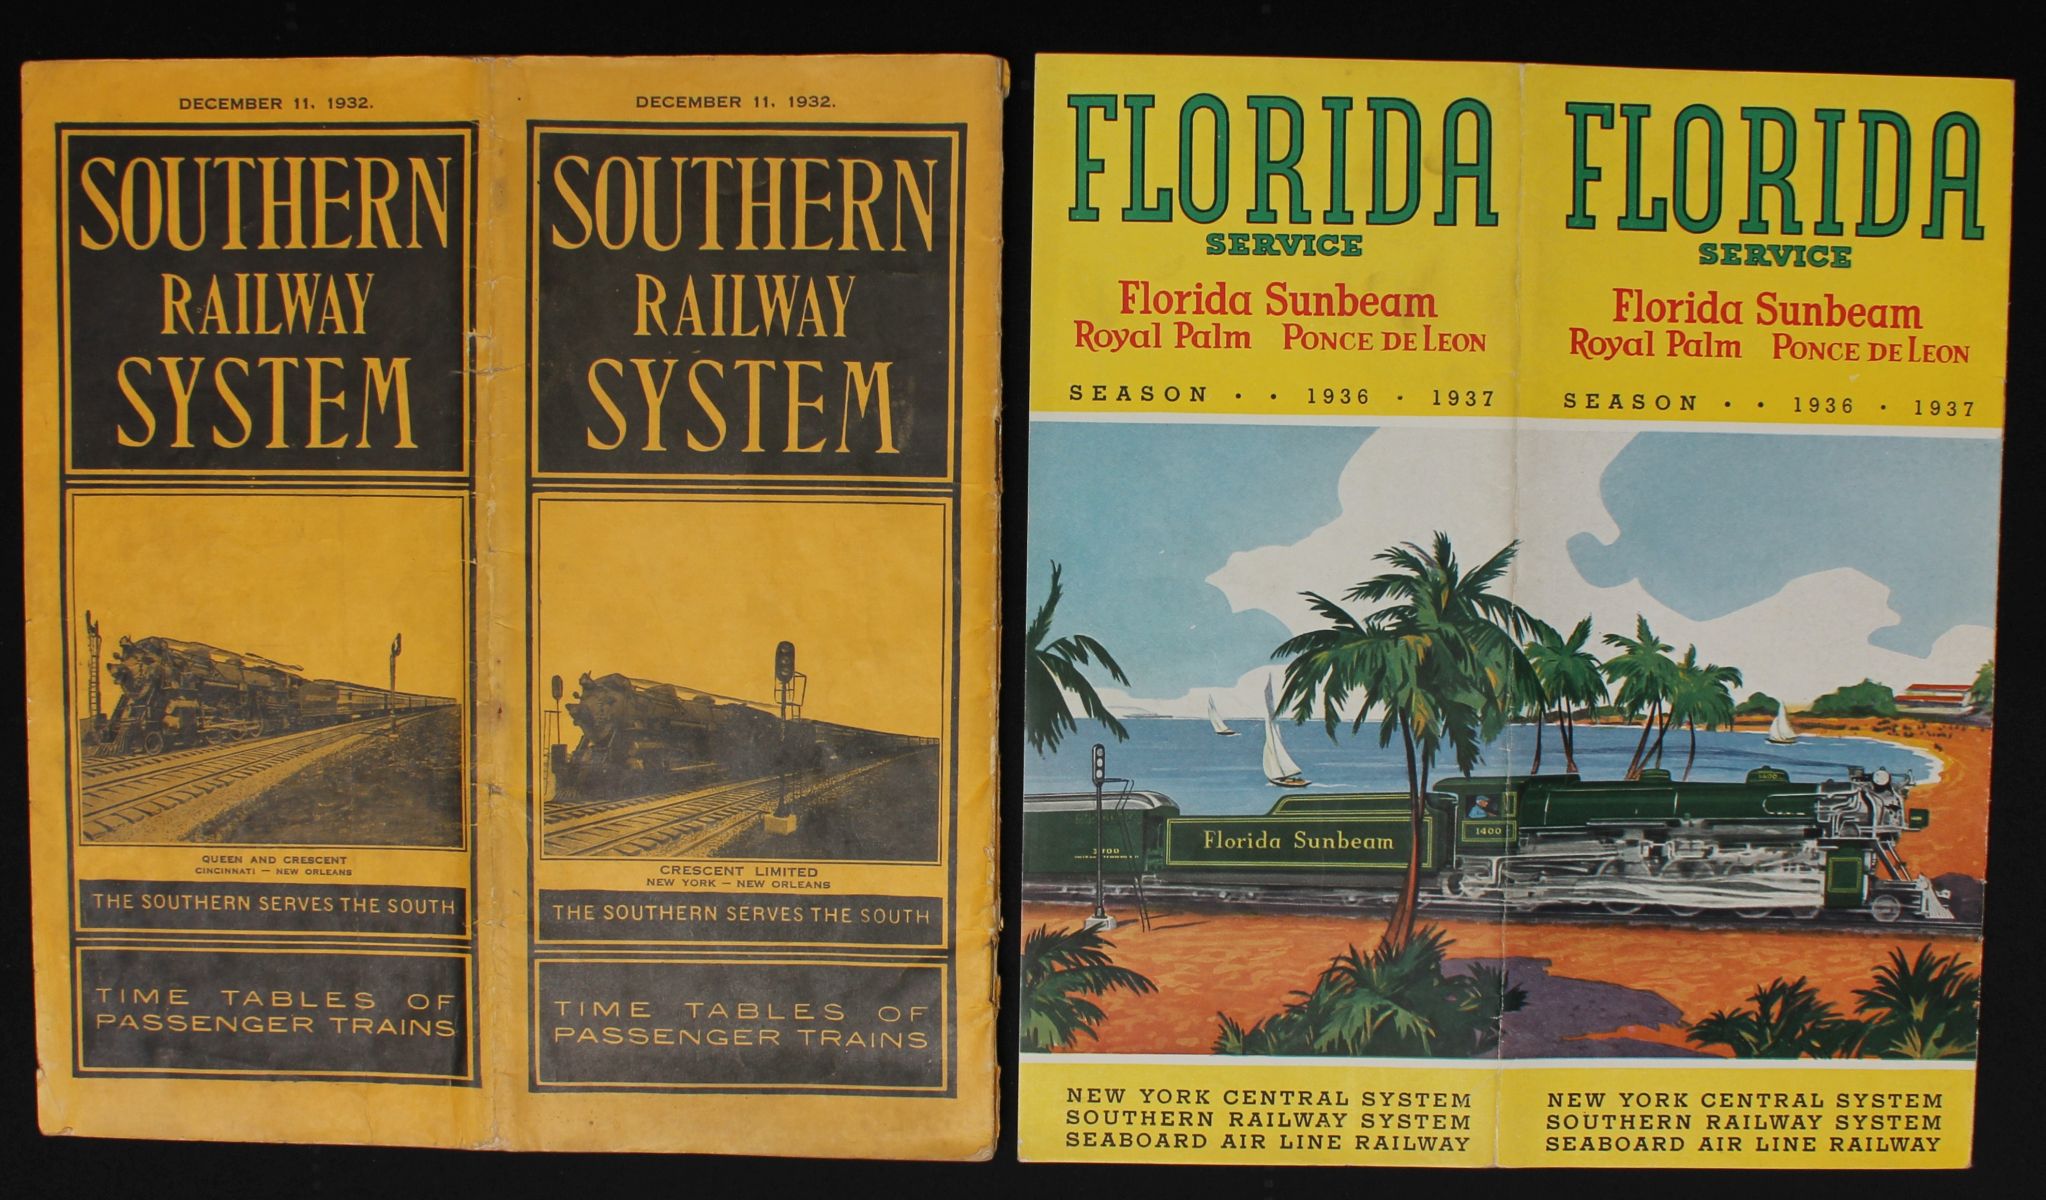 A COLLECTION OF SOUTHERN RAILWAY SYSTEM EPHEMERA